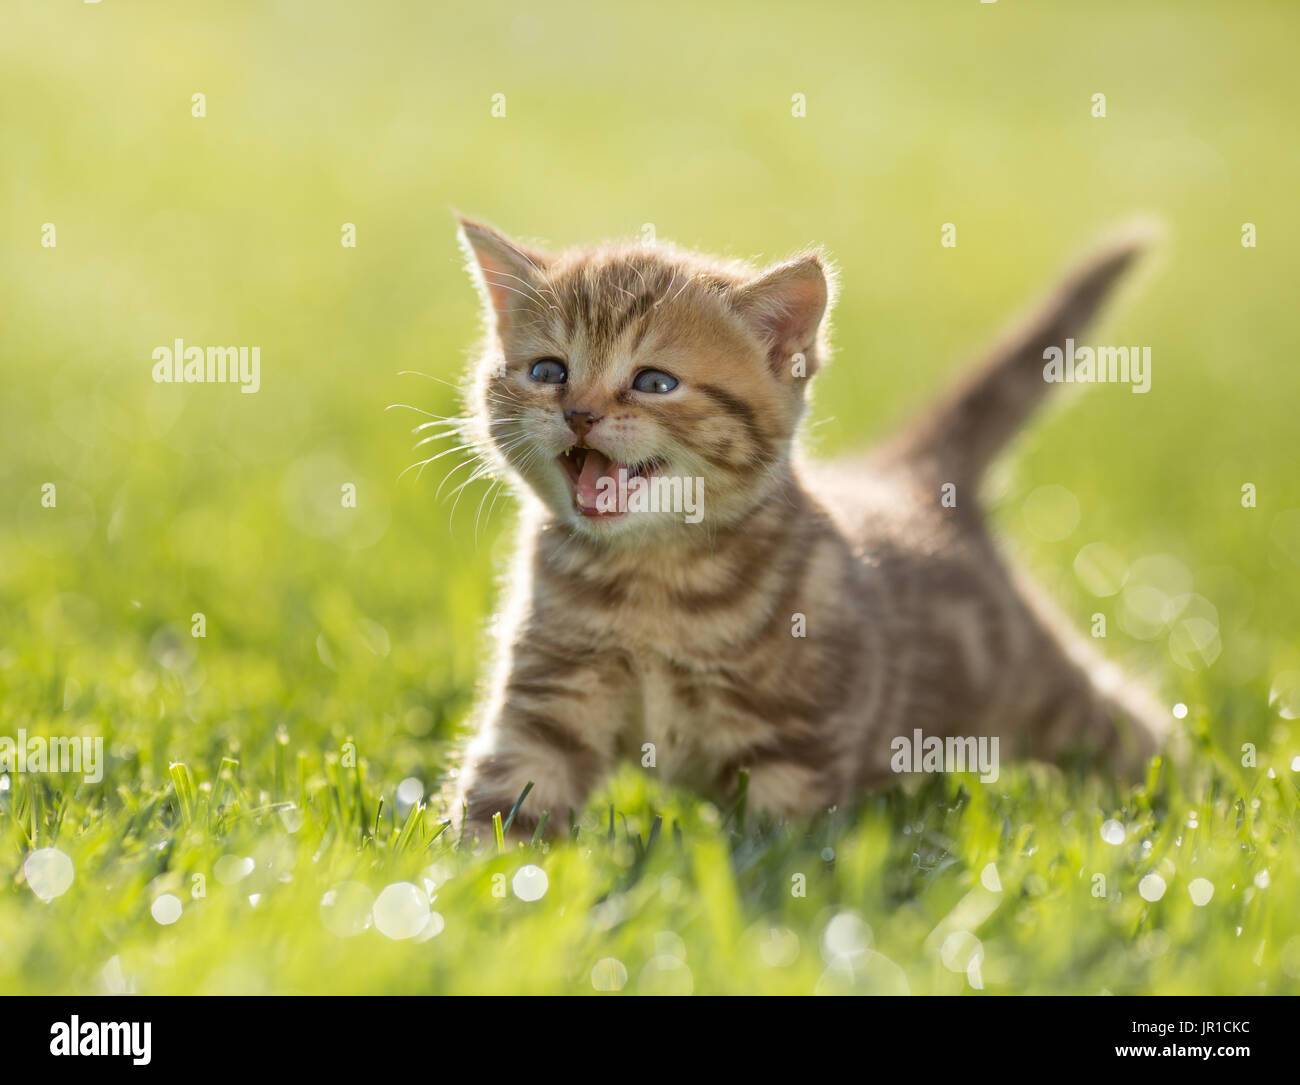 Young kitten cat meowing in the green grass Stock Photo